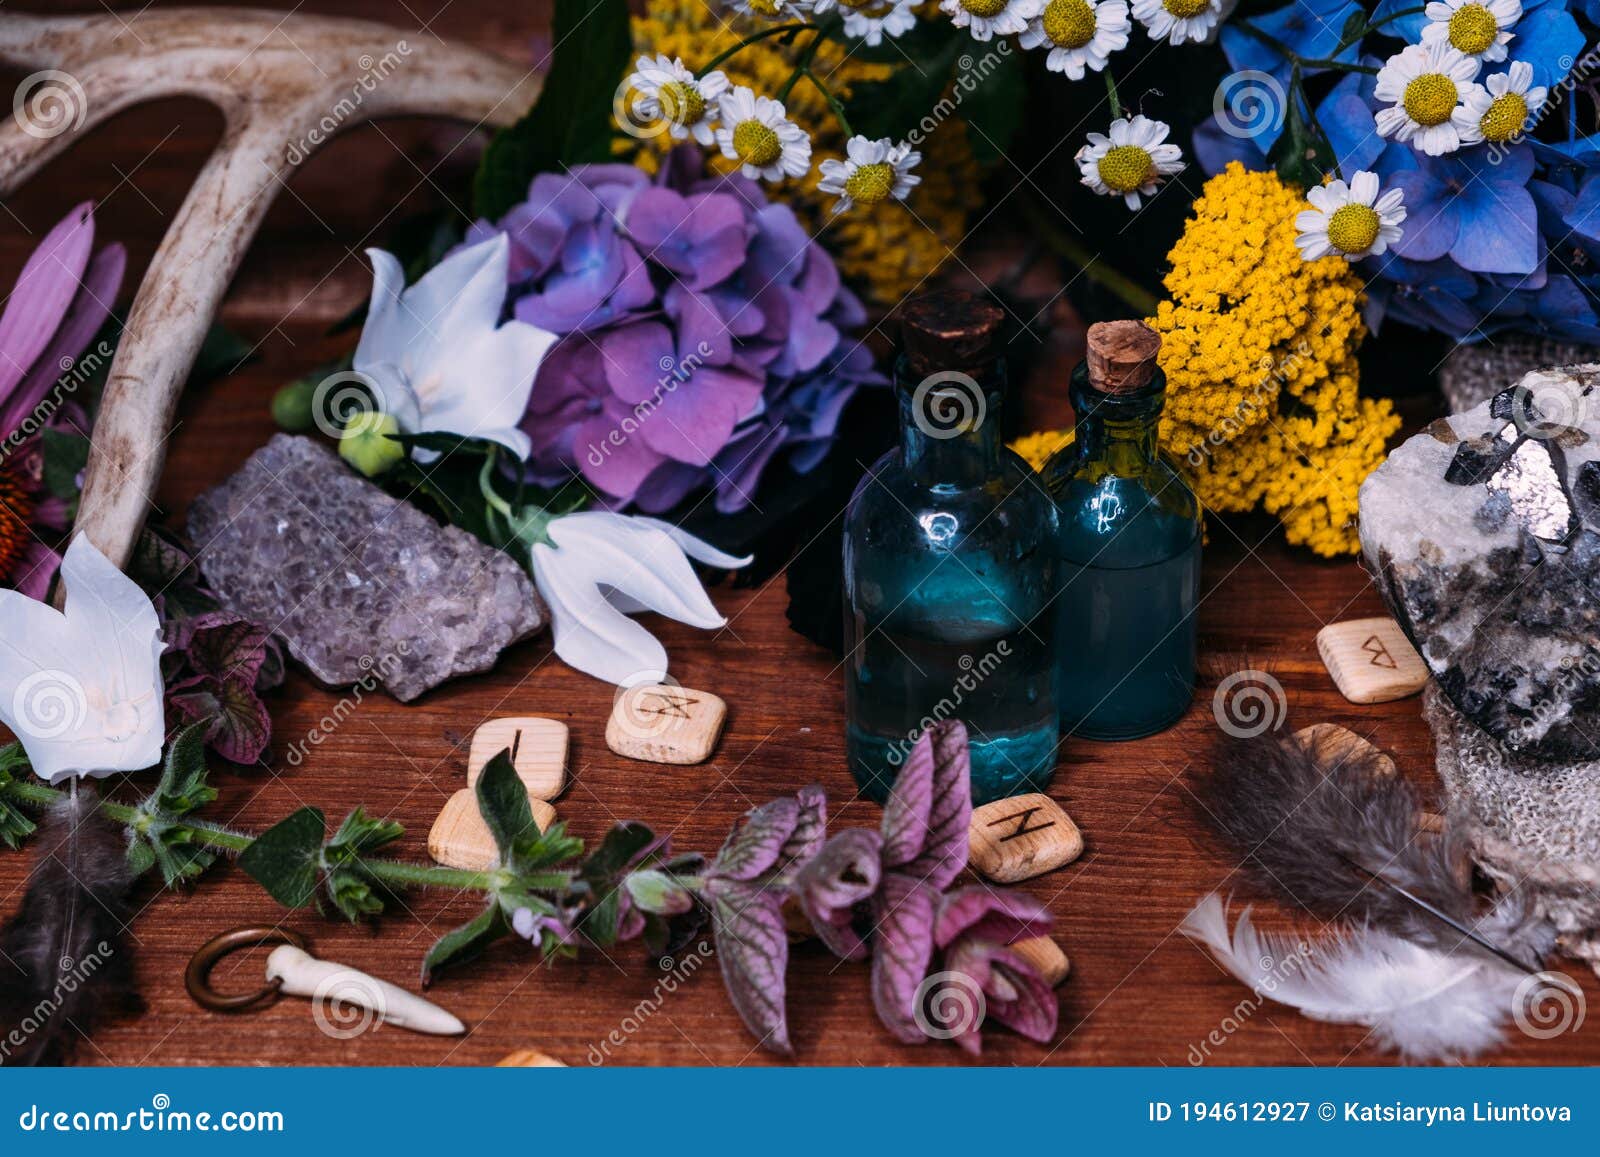 Witchcraft Concept with Potions, Herbs and Occult Equipment Stock Image